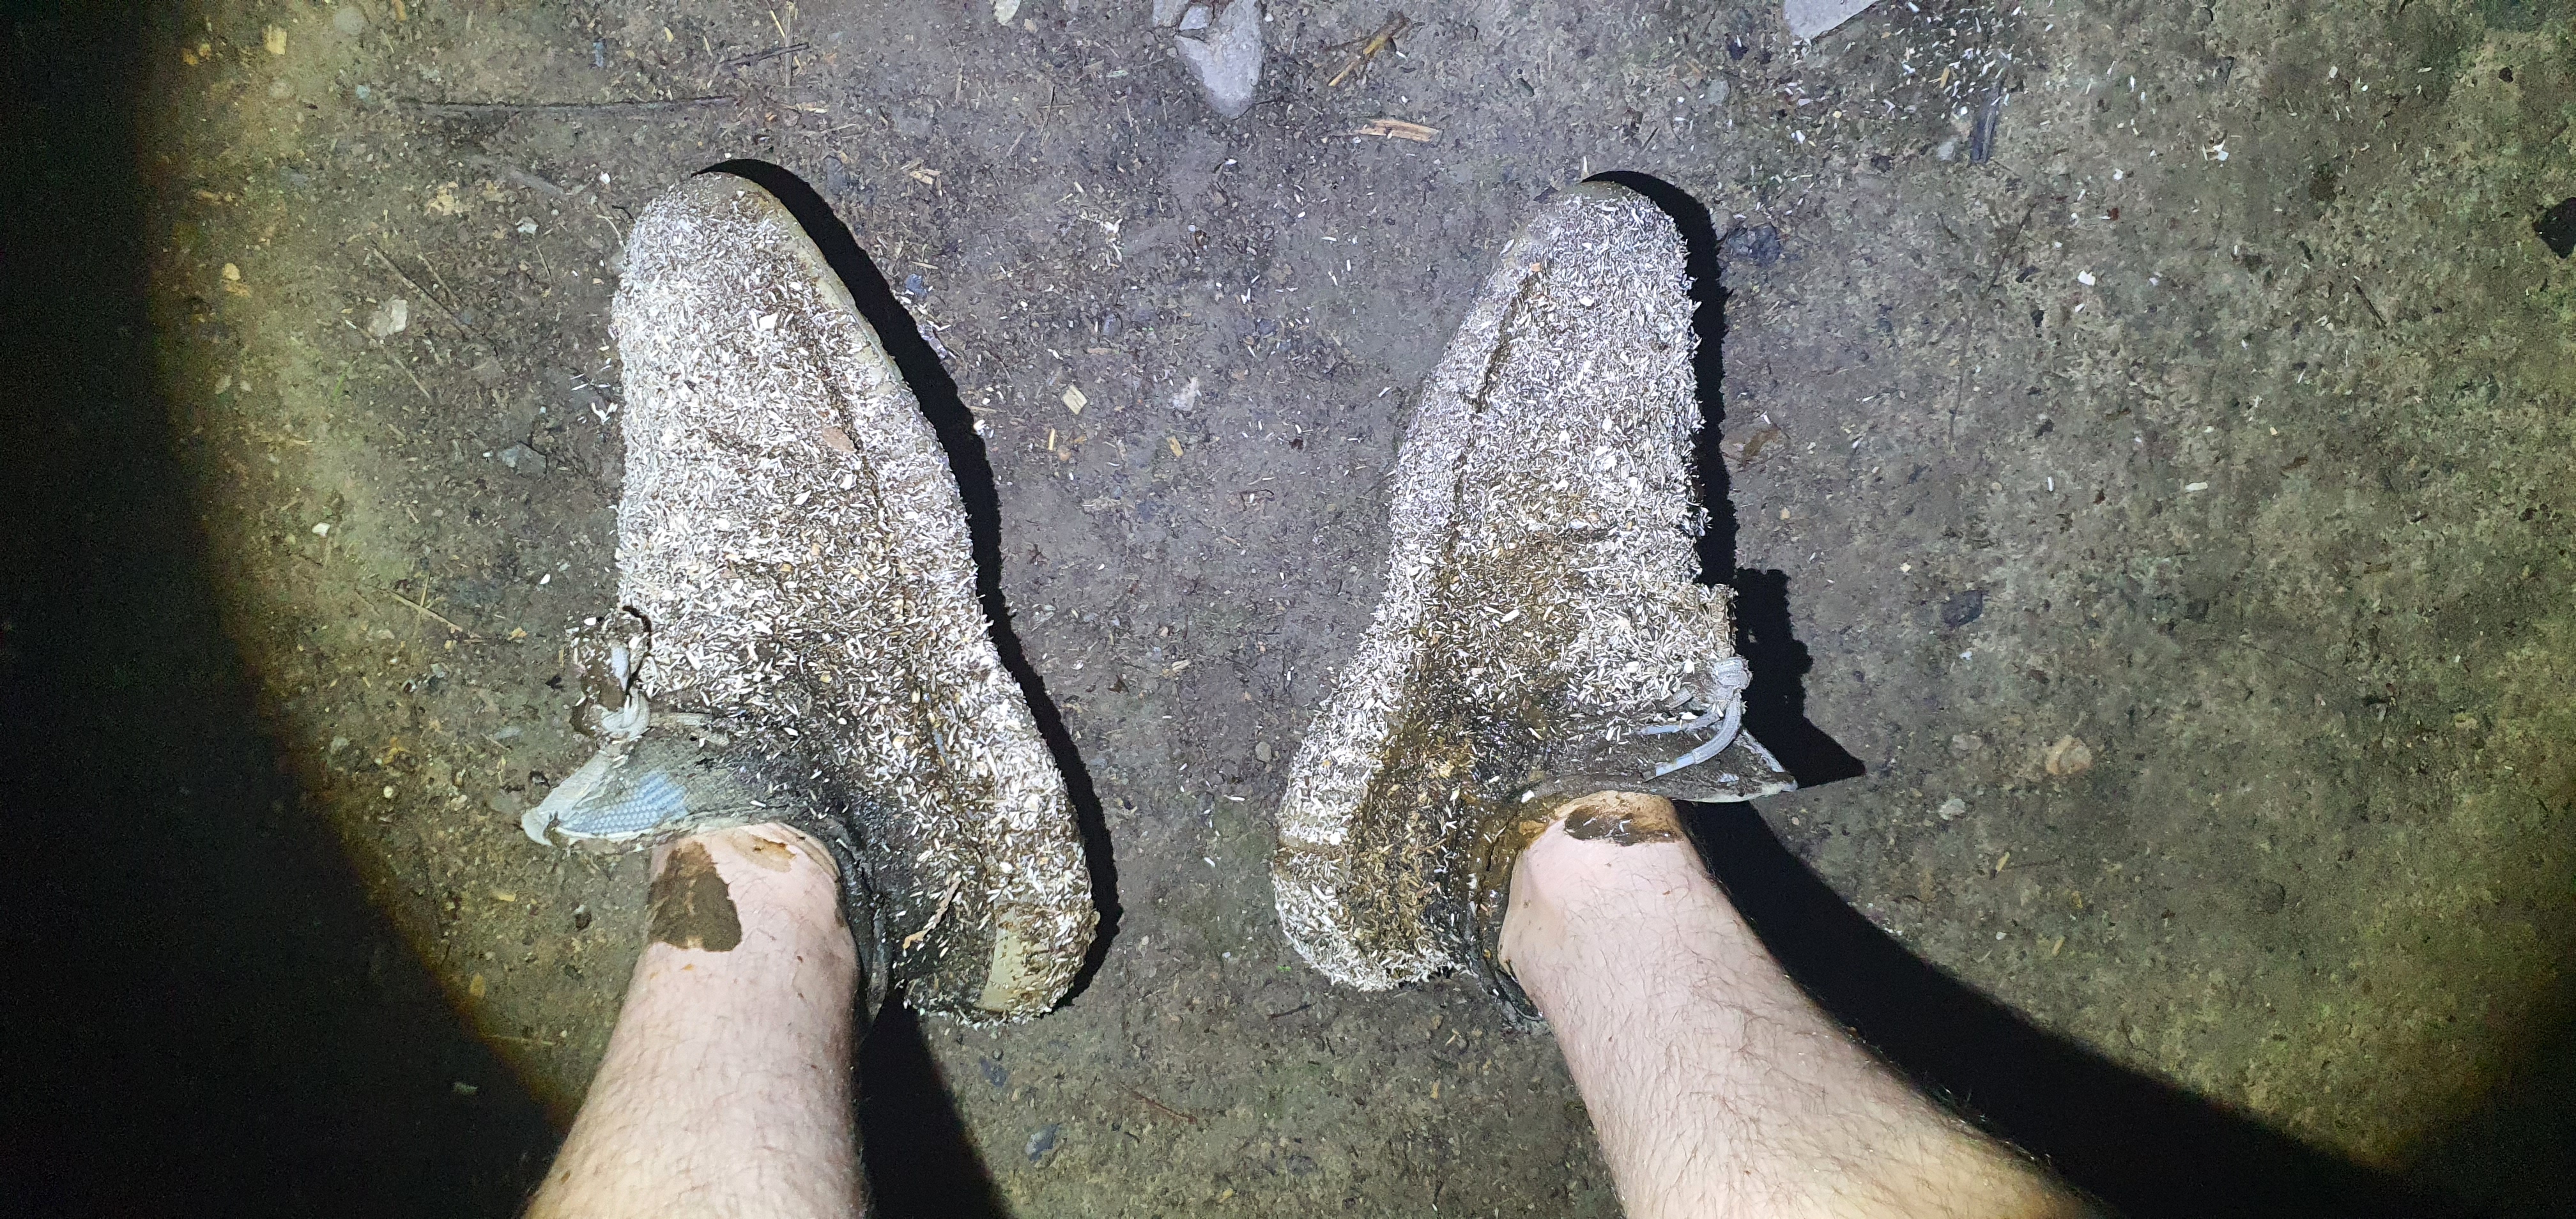 Shit pissed Yeezy in mud Part 3